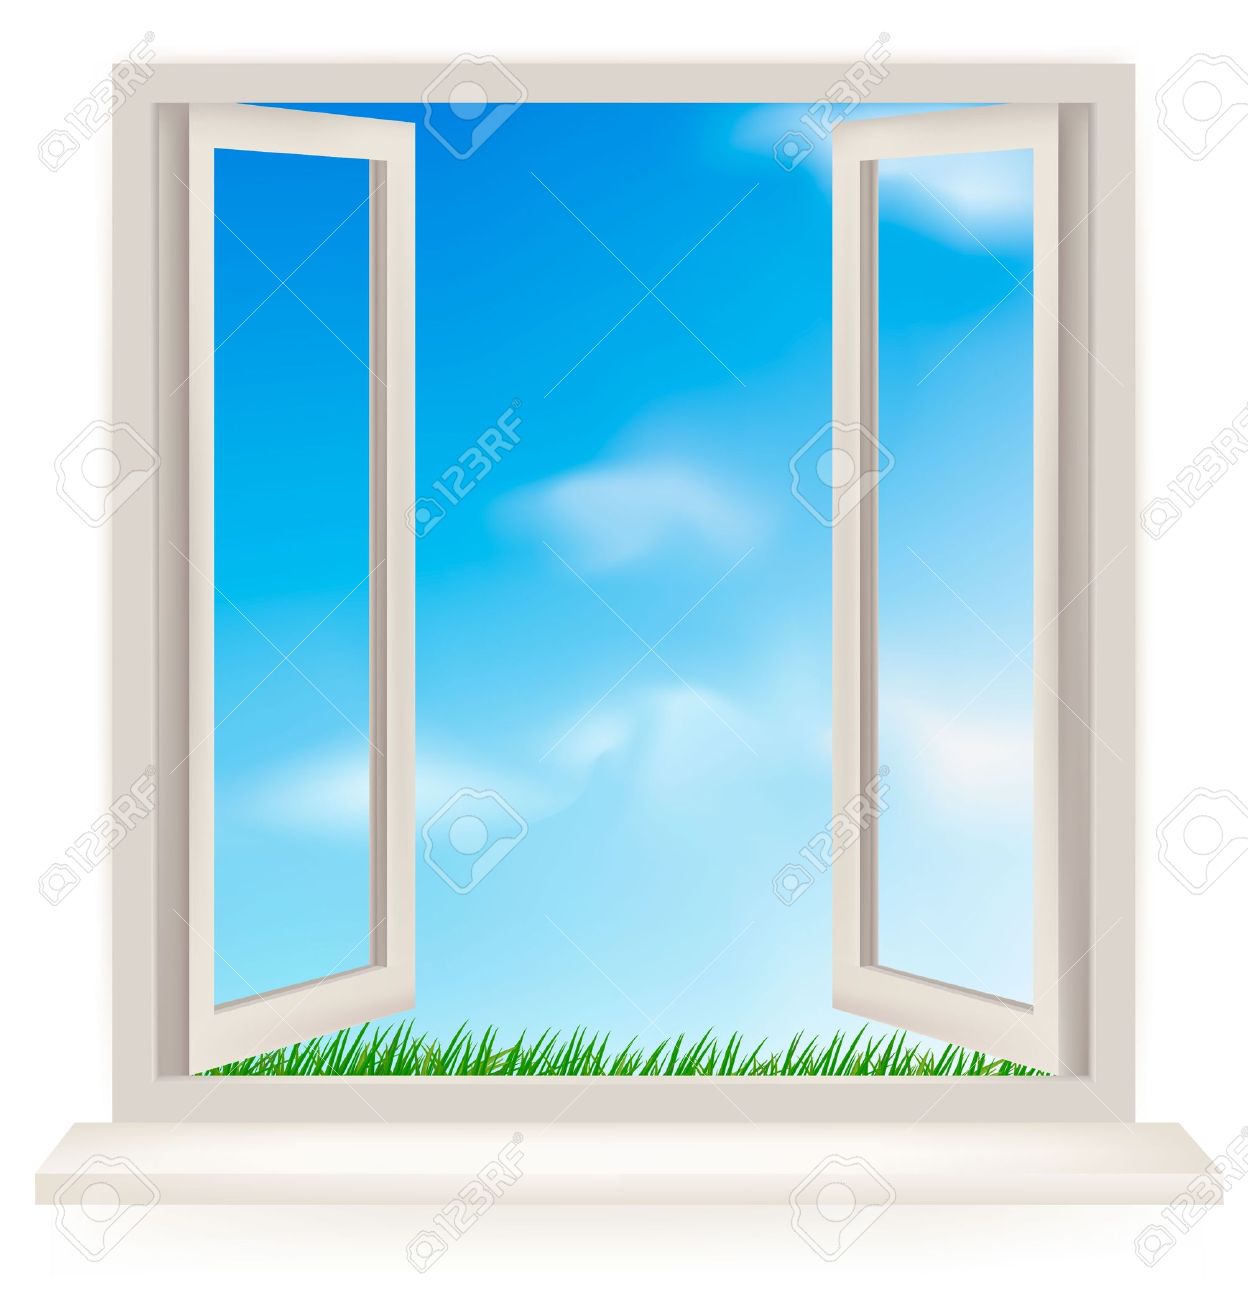 Window clip art images free clipart images